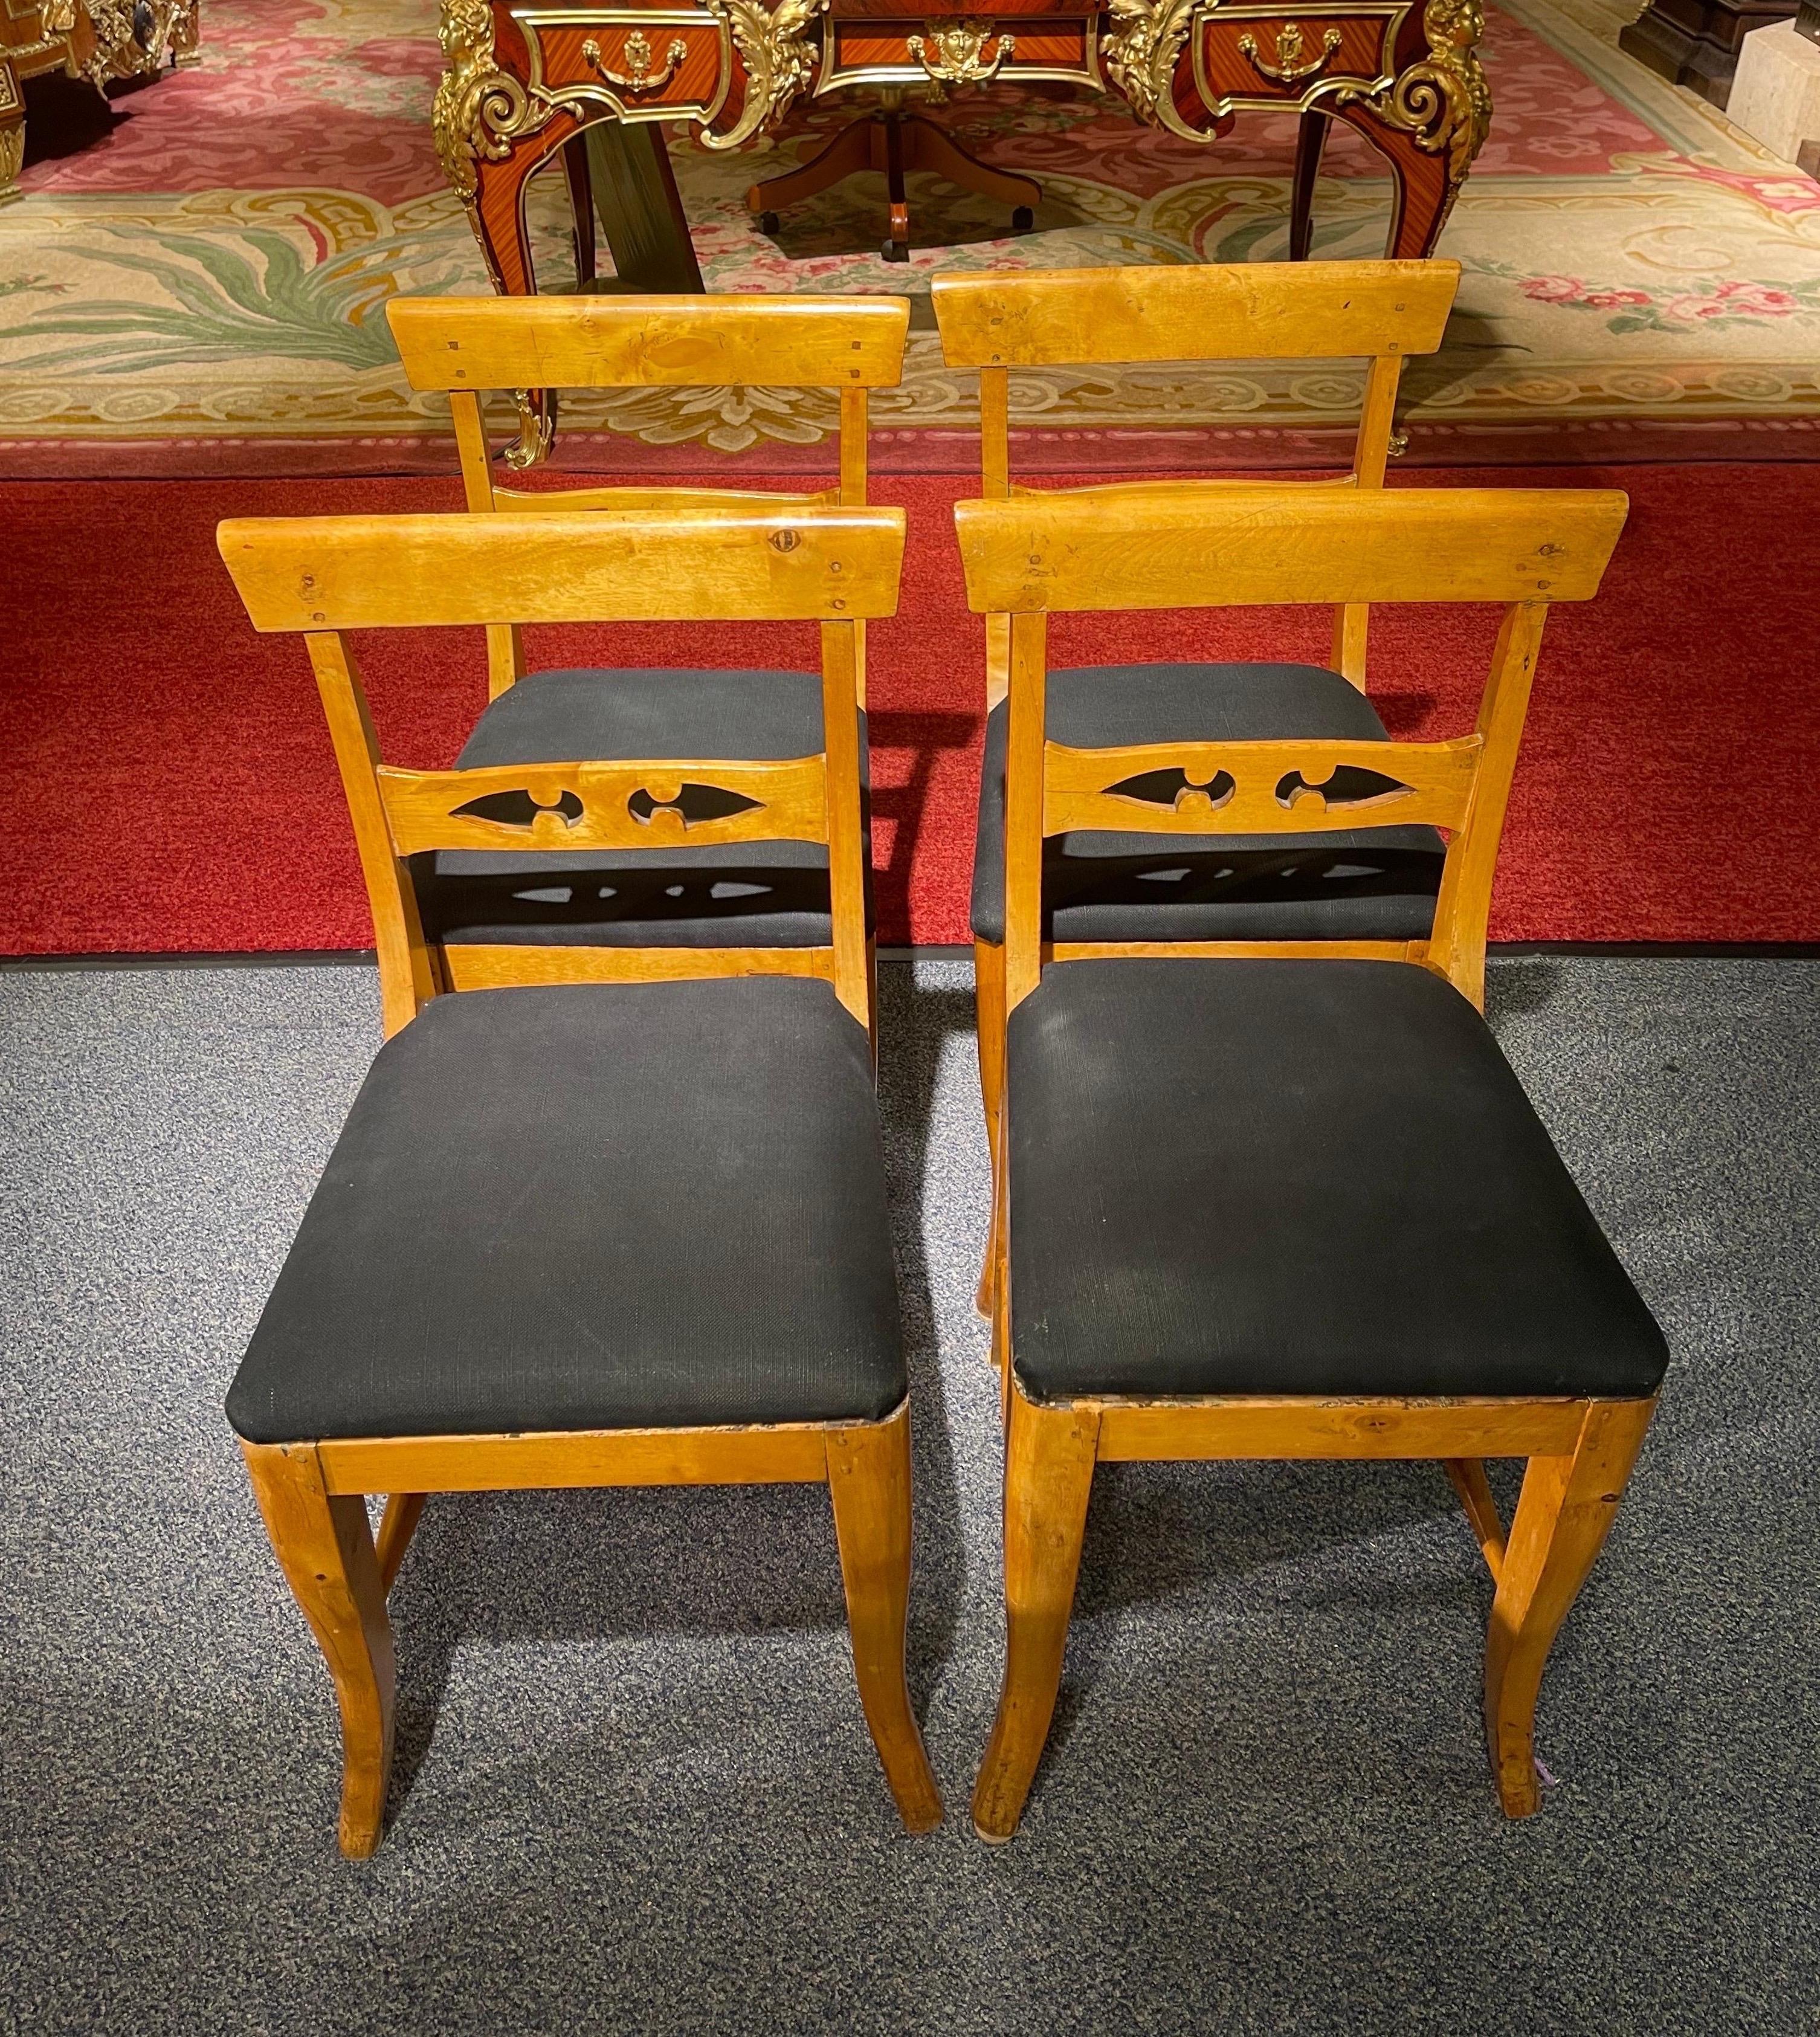 Beautiful set of 4 Biedermeier chairs from around 1860
Solid birch wood. Seat upholstered and covered with black fabric.
Very stable and robust built.